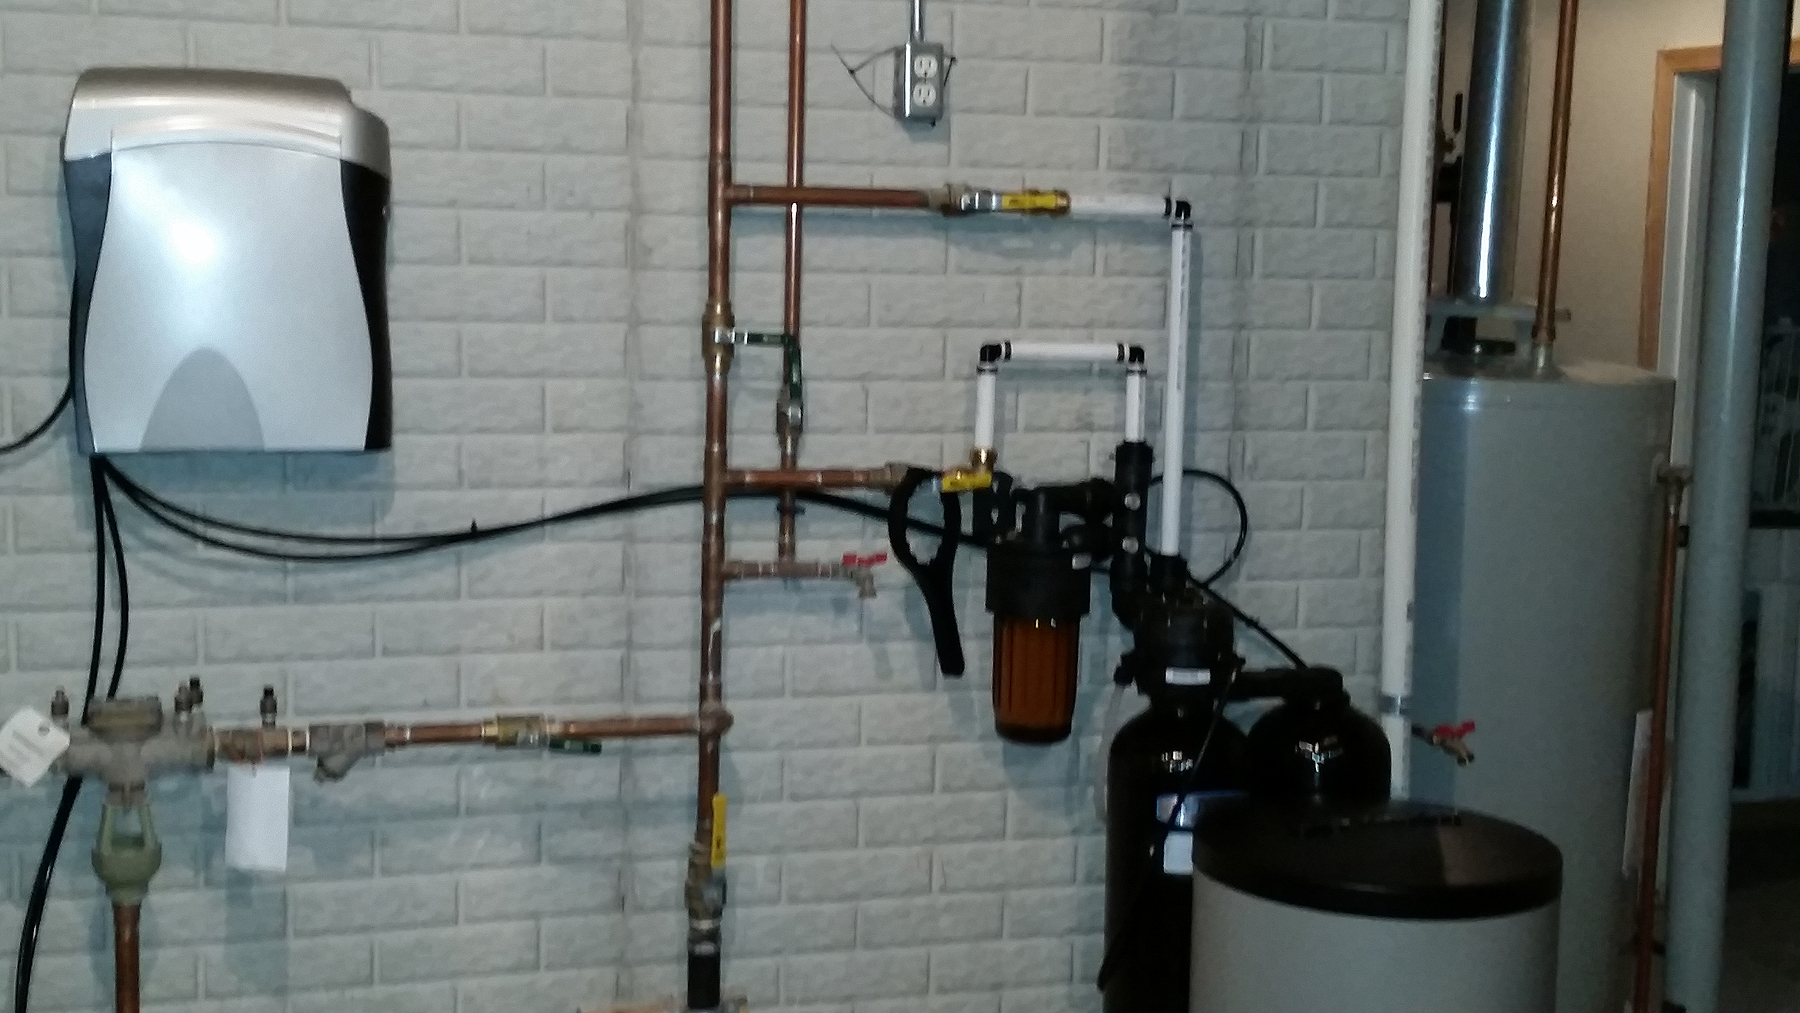 Kinetico’s Whole House Water Filtration System installed in Davenport, Iowa